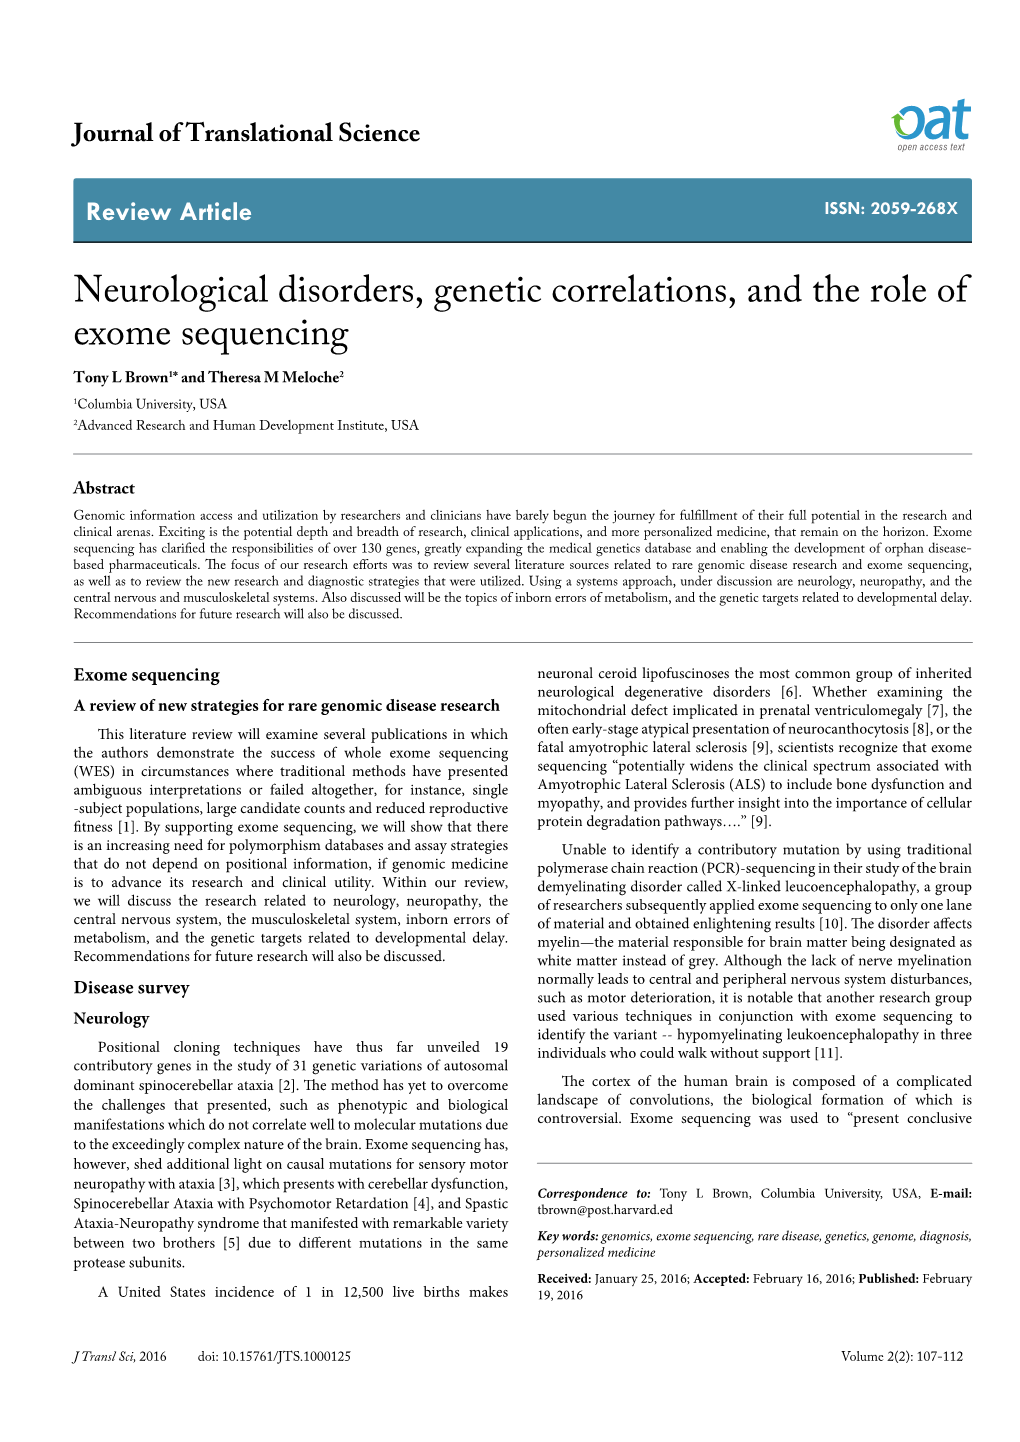 Neurological Disorders, Genetic Correlations, and the Role of Exome Sequencing